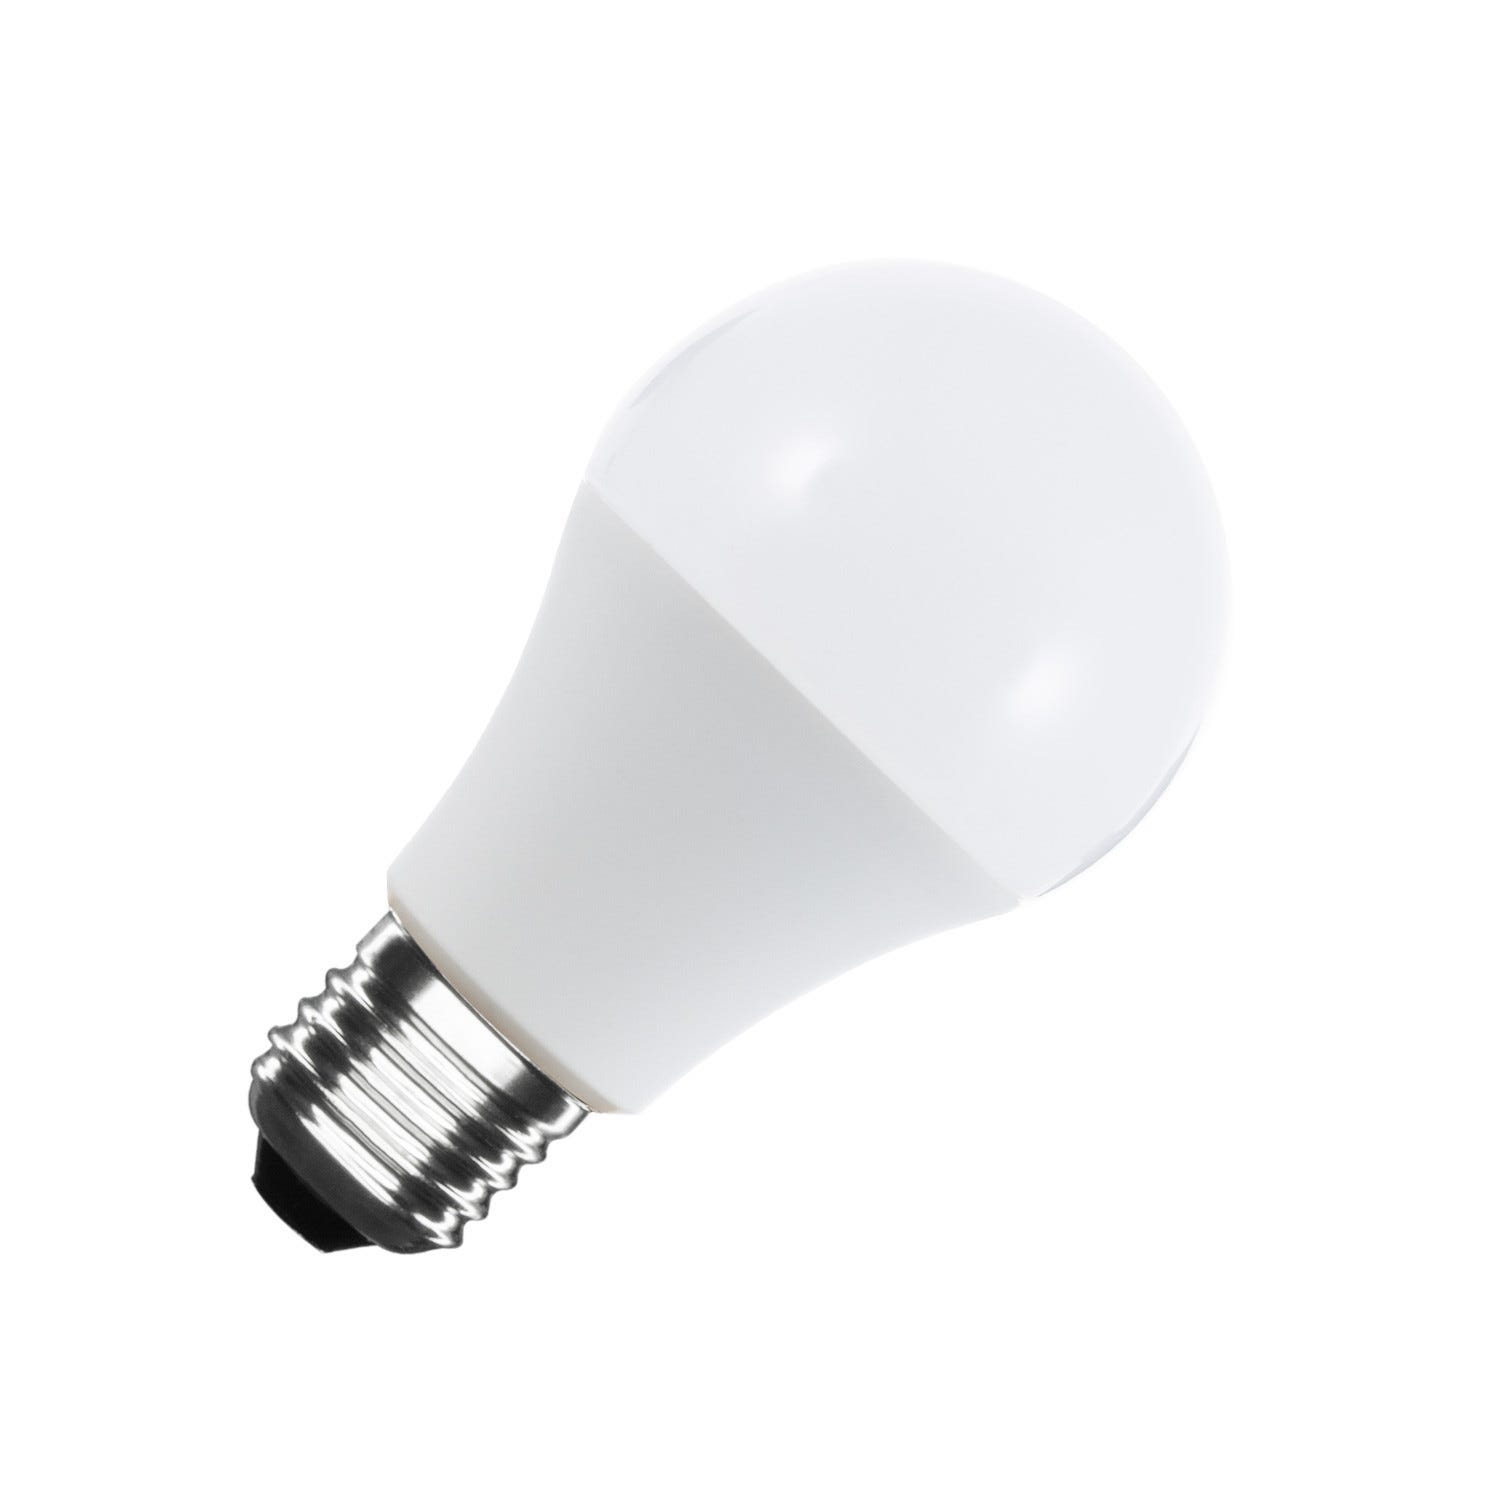 Ampoule LED Dimmable E27 12W 960 lm A60 SwitchDimm No Flicker Blanc Chaud  3000K 180º